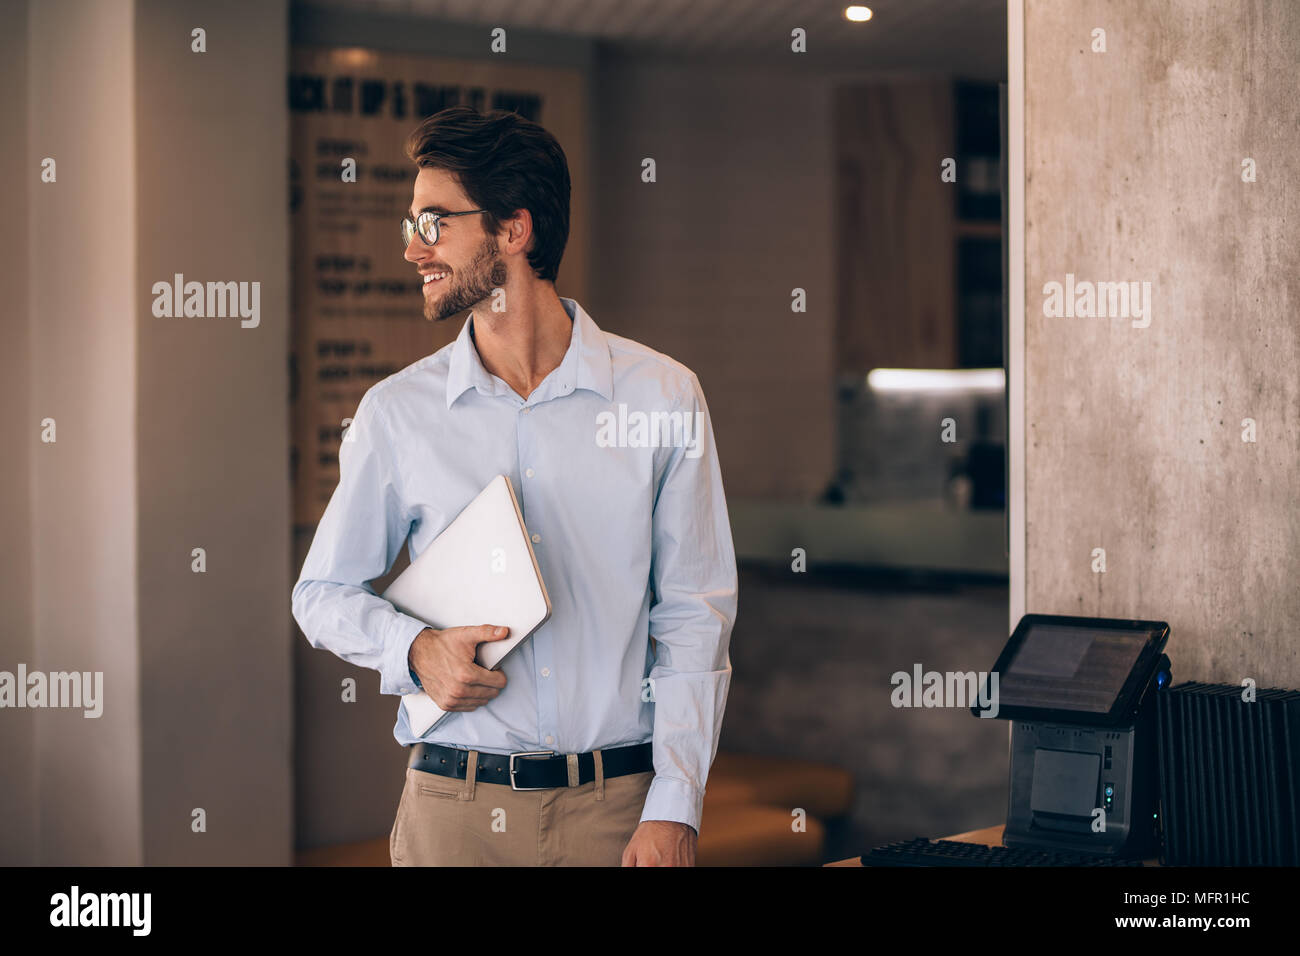 Young man standing in a cafe and looking away. Male restaurant manager with a laptop. Stock Photo